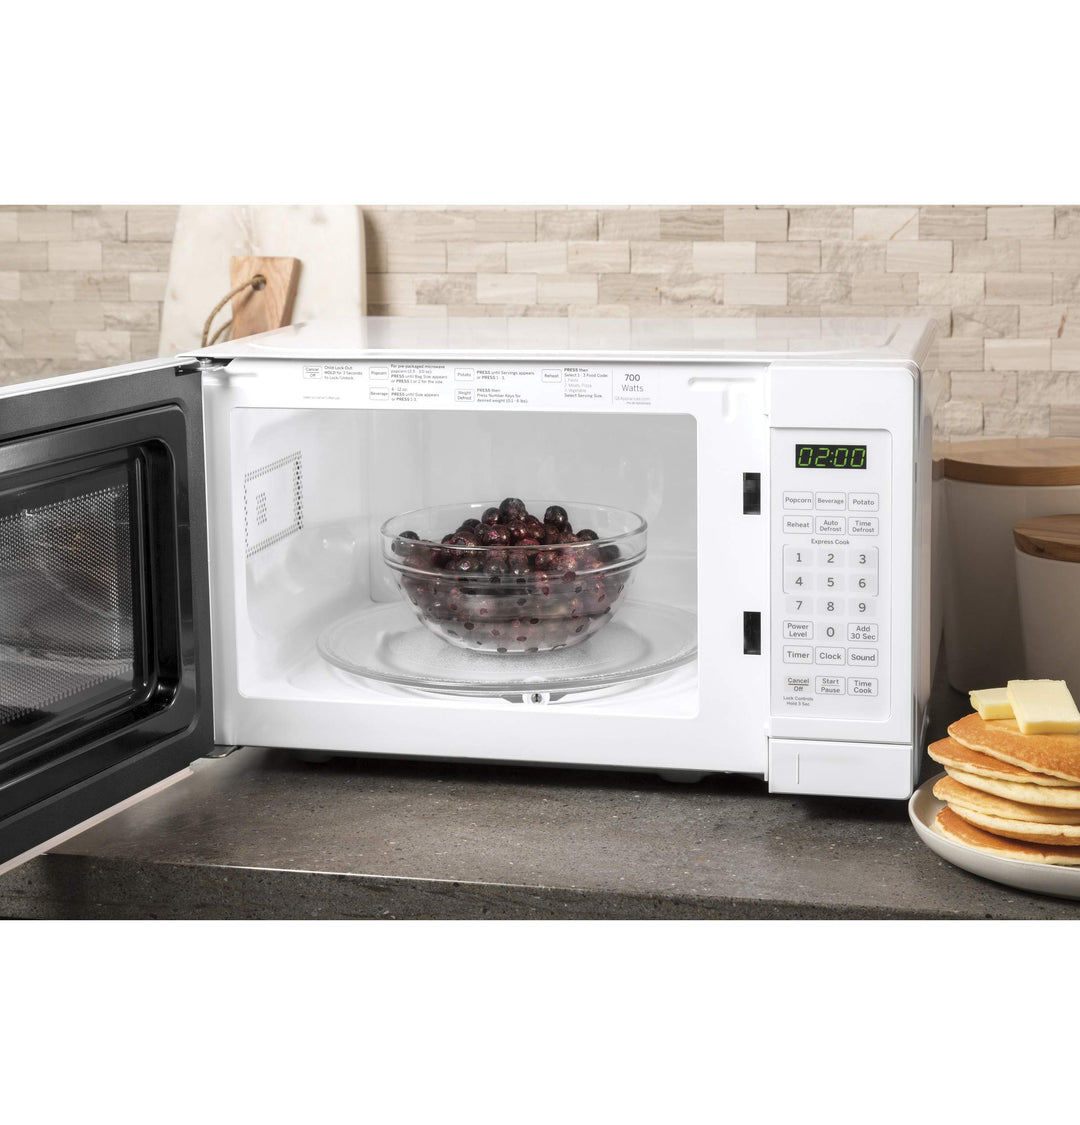 GE Countertop Microwave Oven | 0.7 Cubic Feet Capacity, 700 Watts | Kitchen Essentials for the Countertop or Dorm Room | White